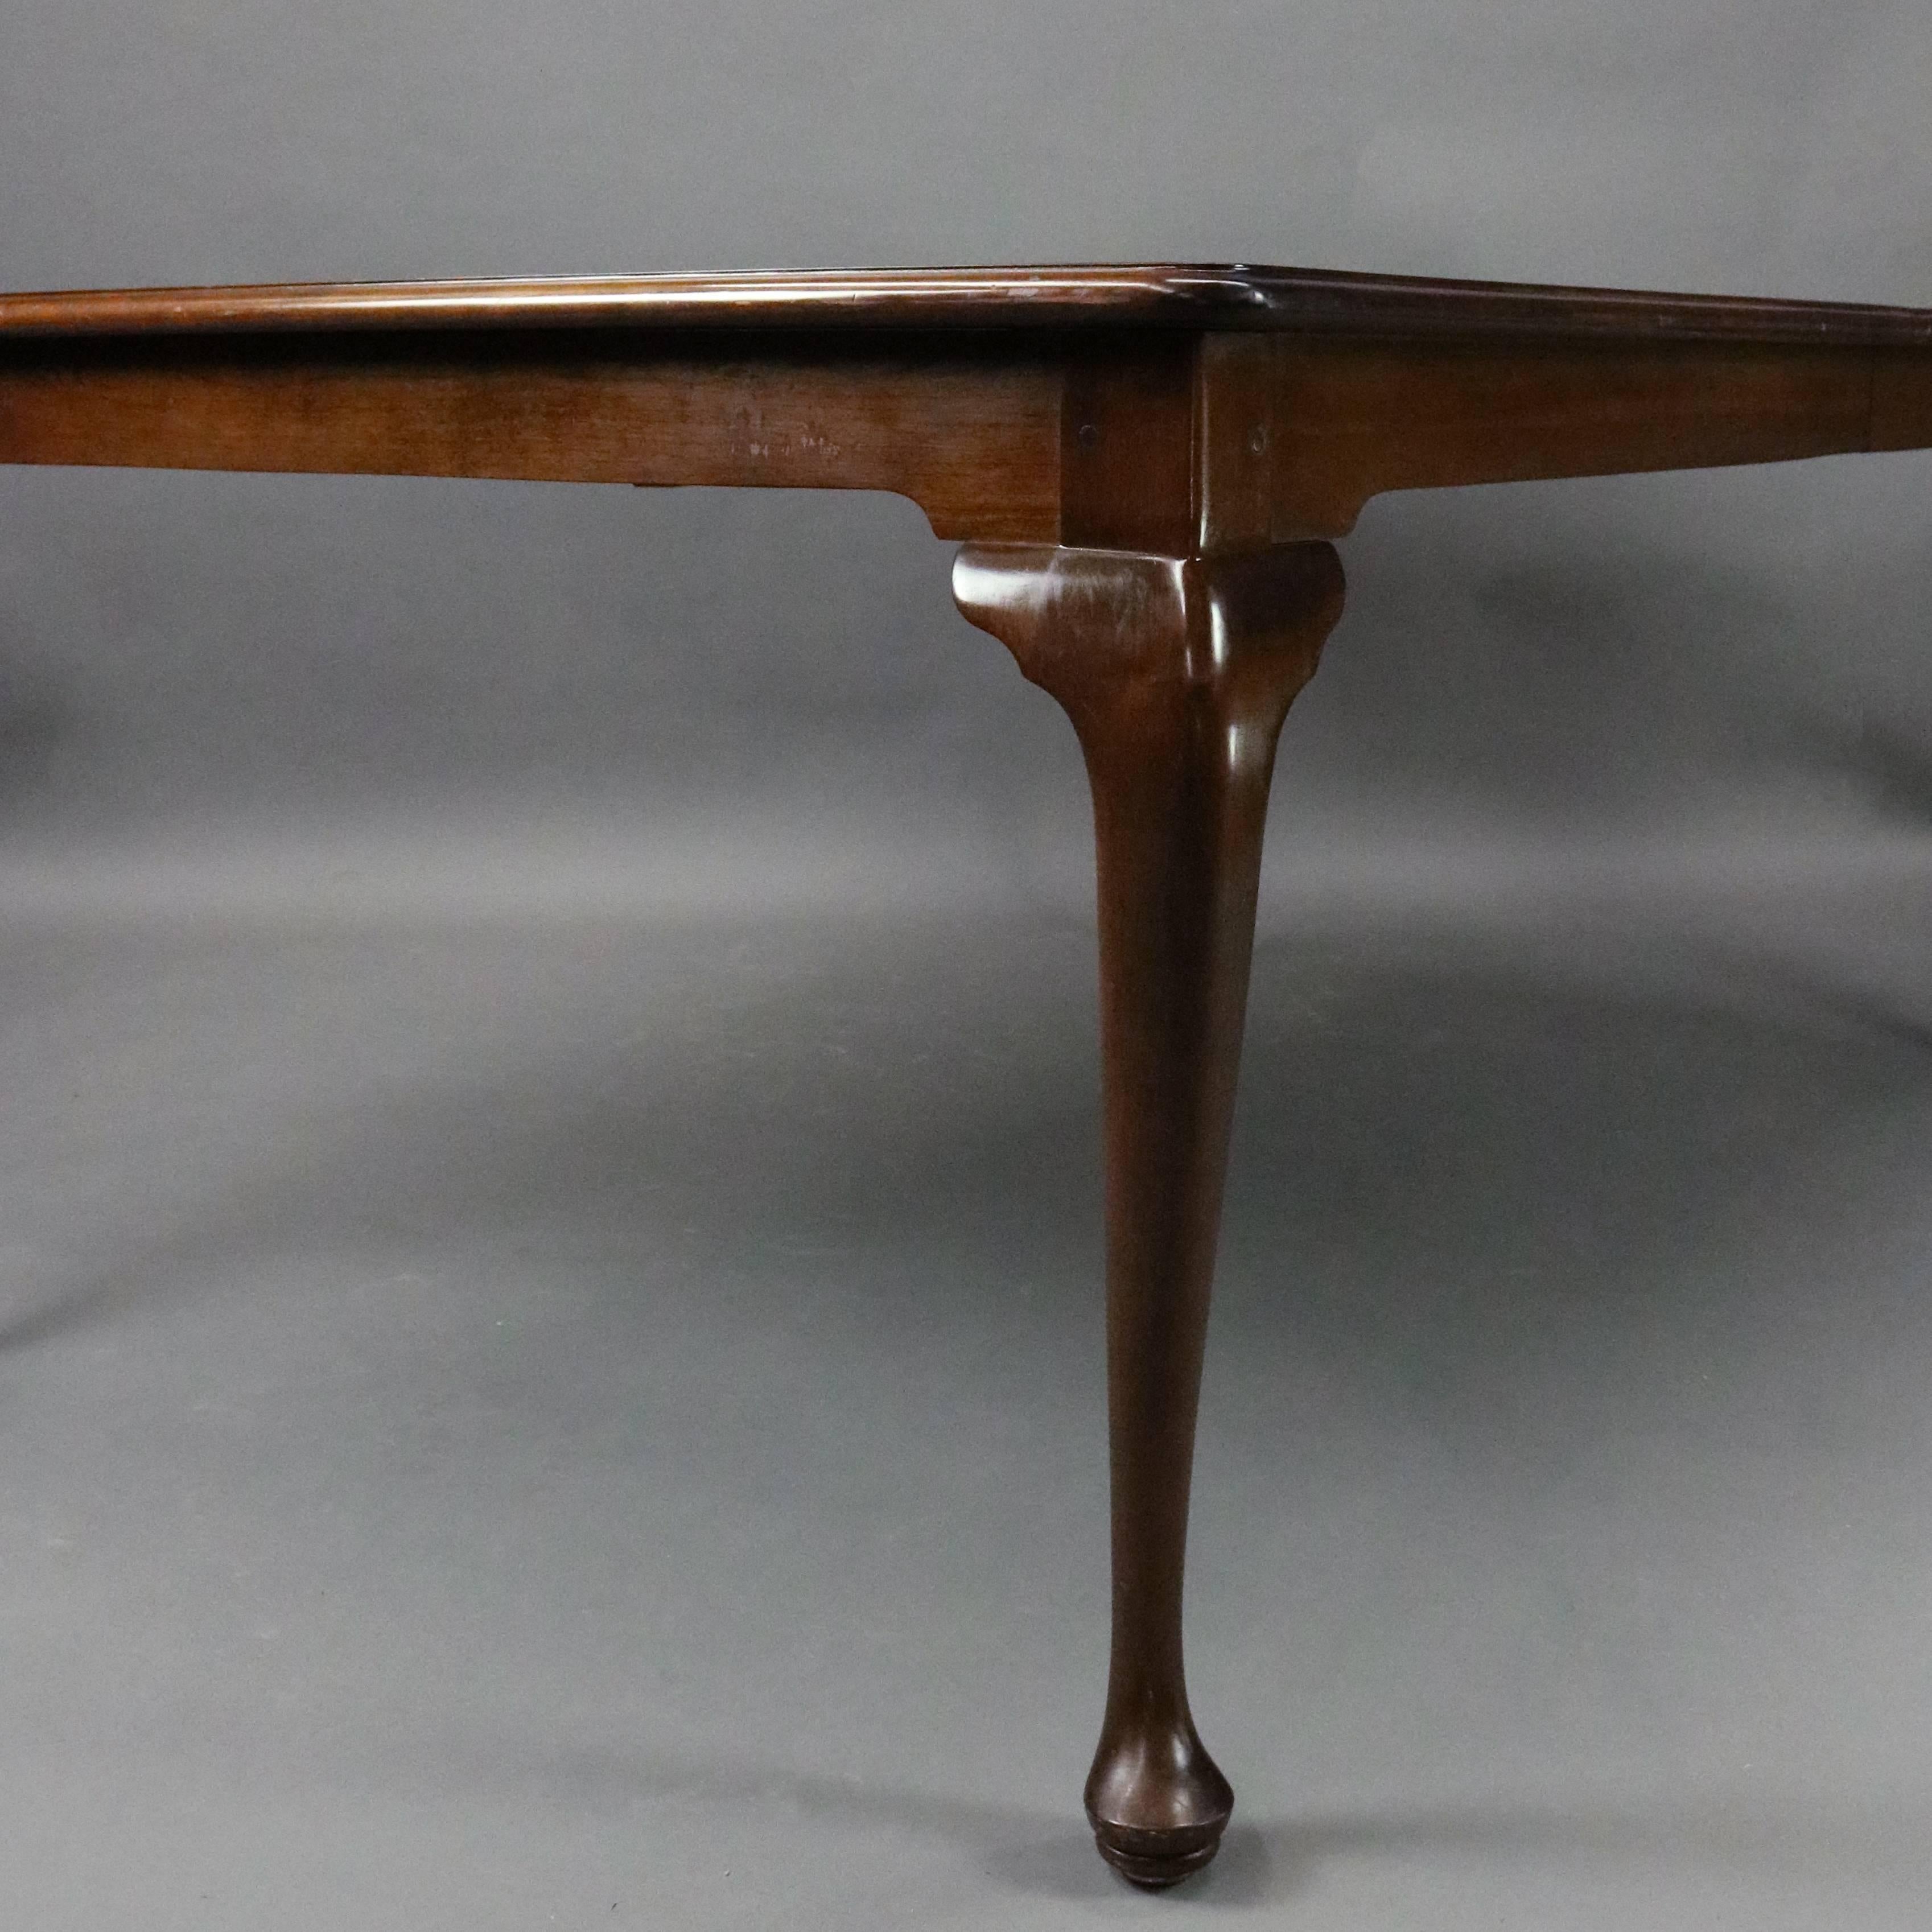 L. & J.G. Stickley Cherry Valley collection dining table features solid cherry construction, Queen Anne style legs, four leaves extending to 10ft, circa 1985

Measures: 30" H x 72" W (at smallest) x 49" D; 12" each,